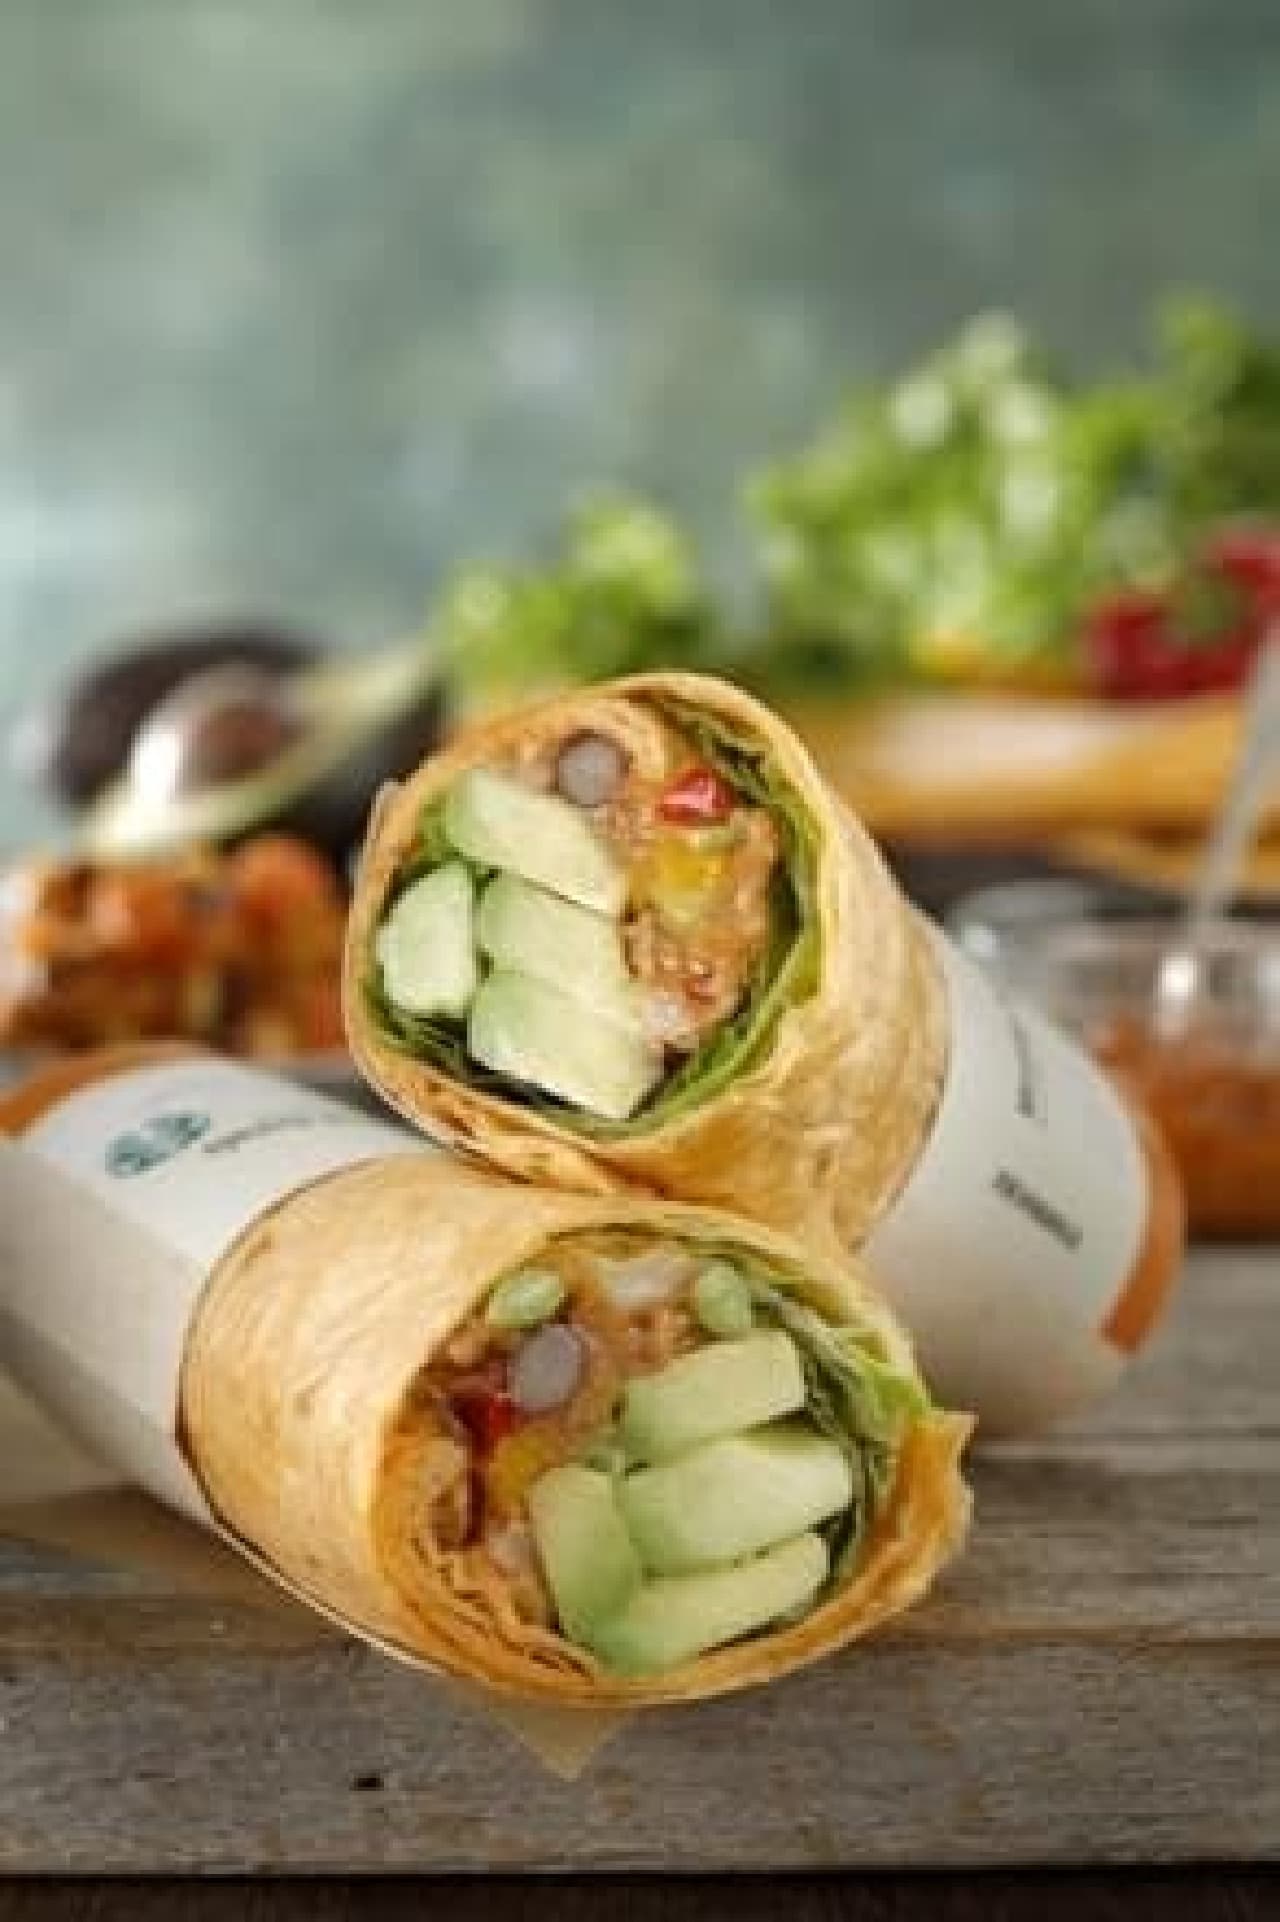 New to Starbucks "Salad Wrap"! (The image is "Mexican Avocado")